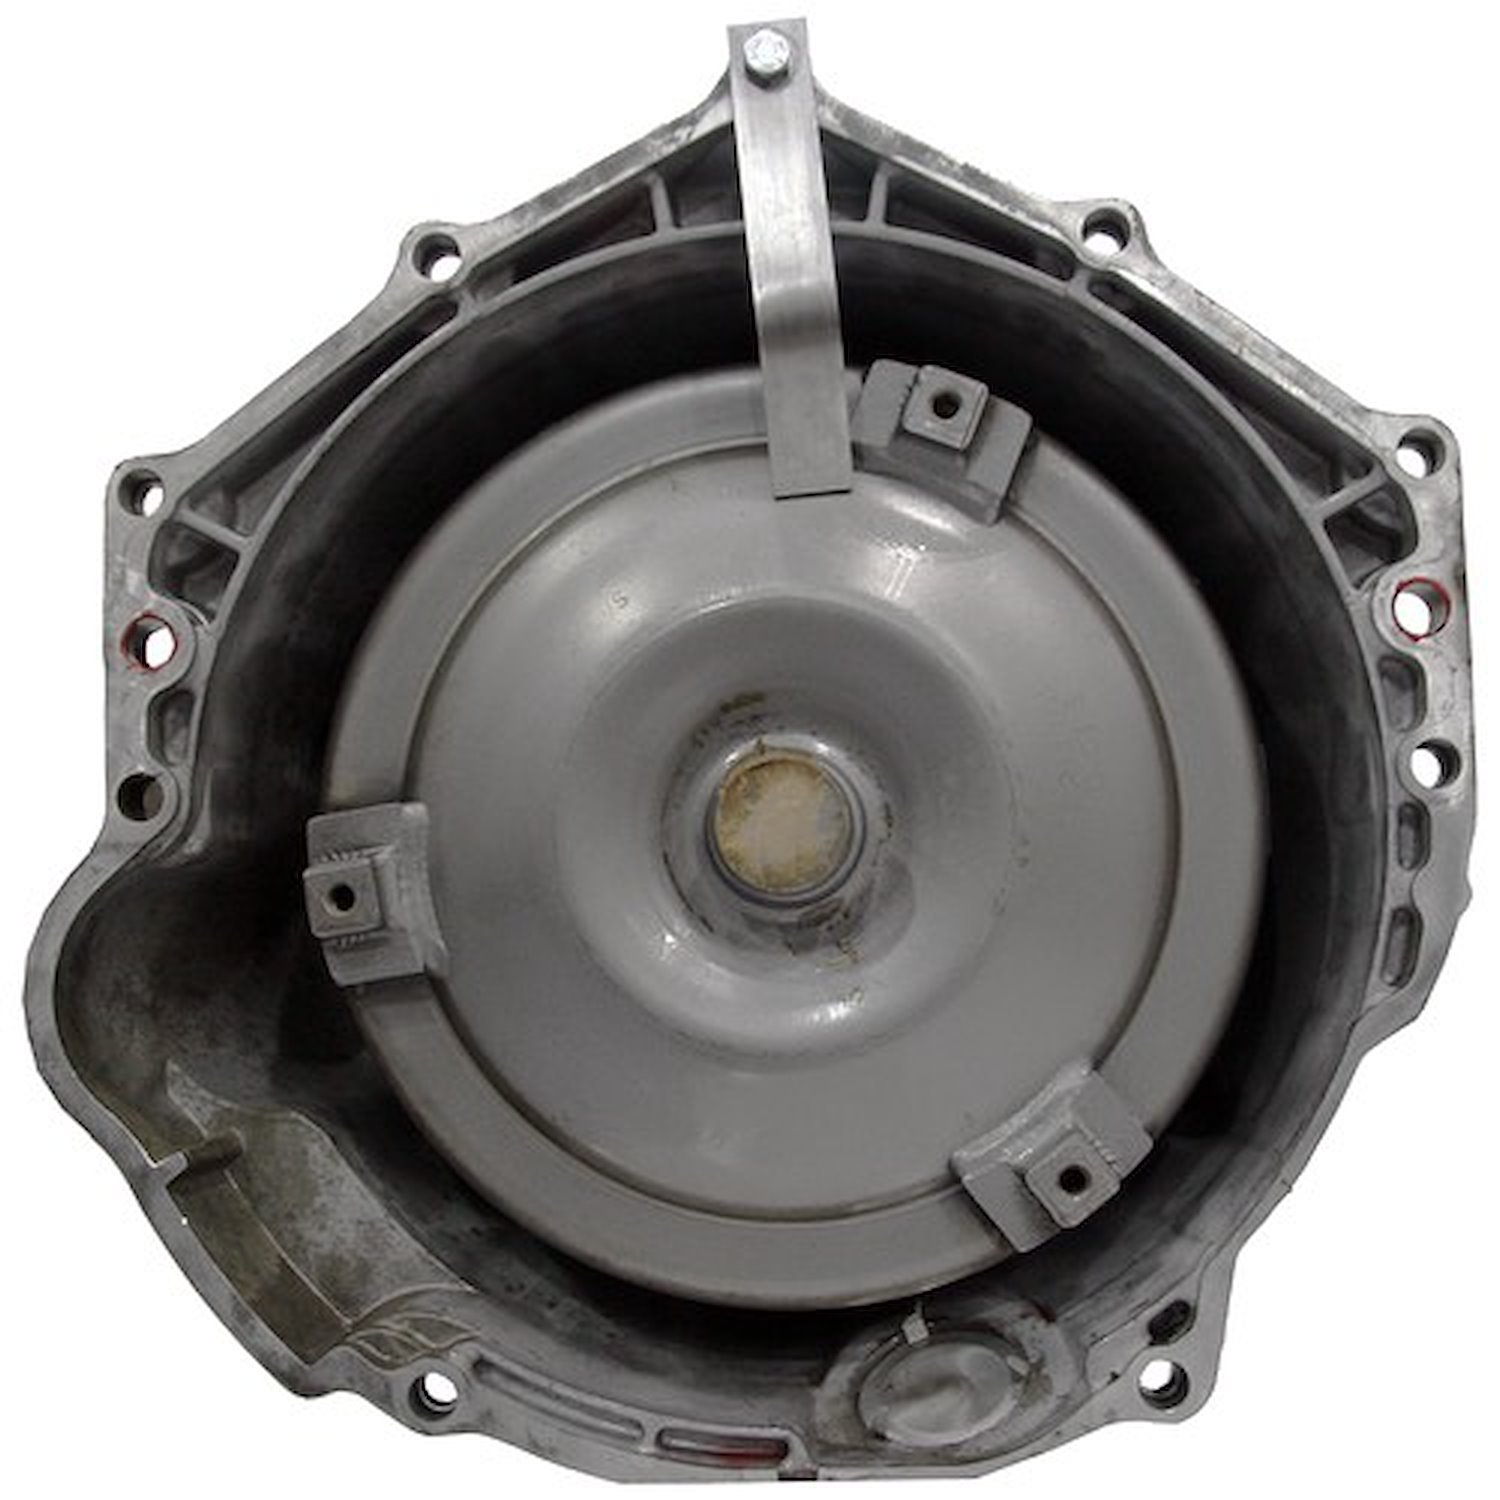 4EAT Reman Auto Trans Fits 2009-2010 Subaru Forester w/2.5L 4cyl. Eng. [Turbocharged]